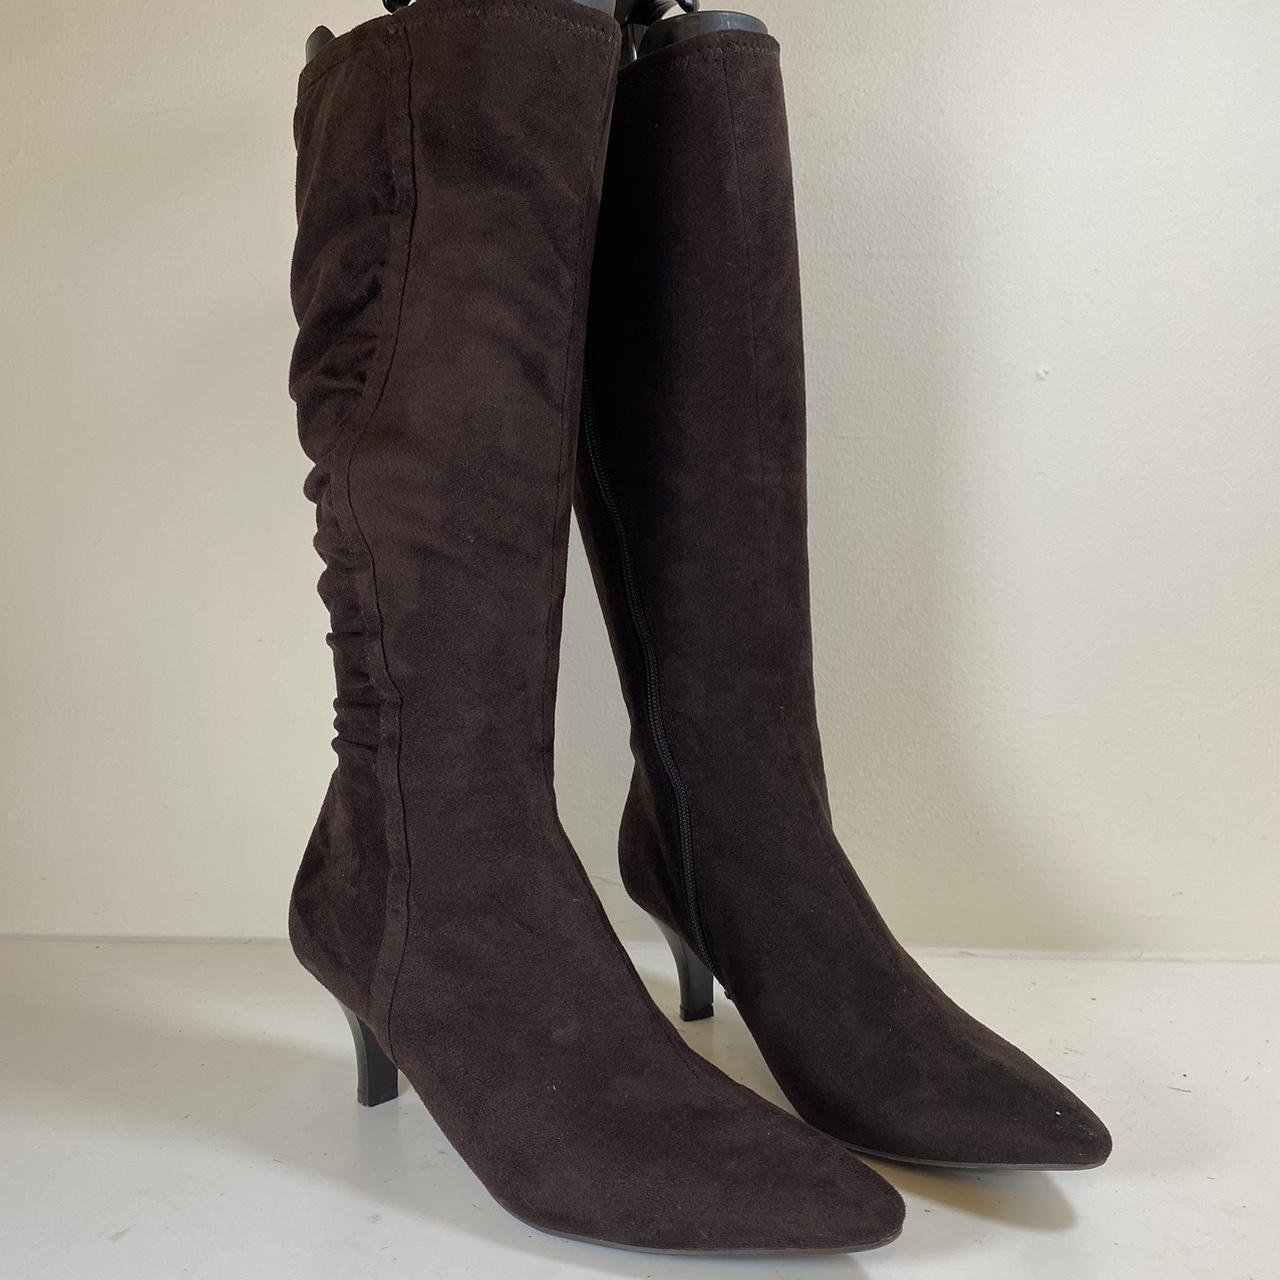 Impo Women's Brown and Black Boots (2)